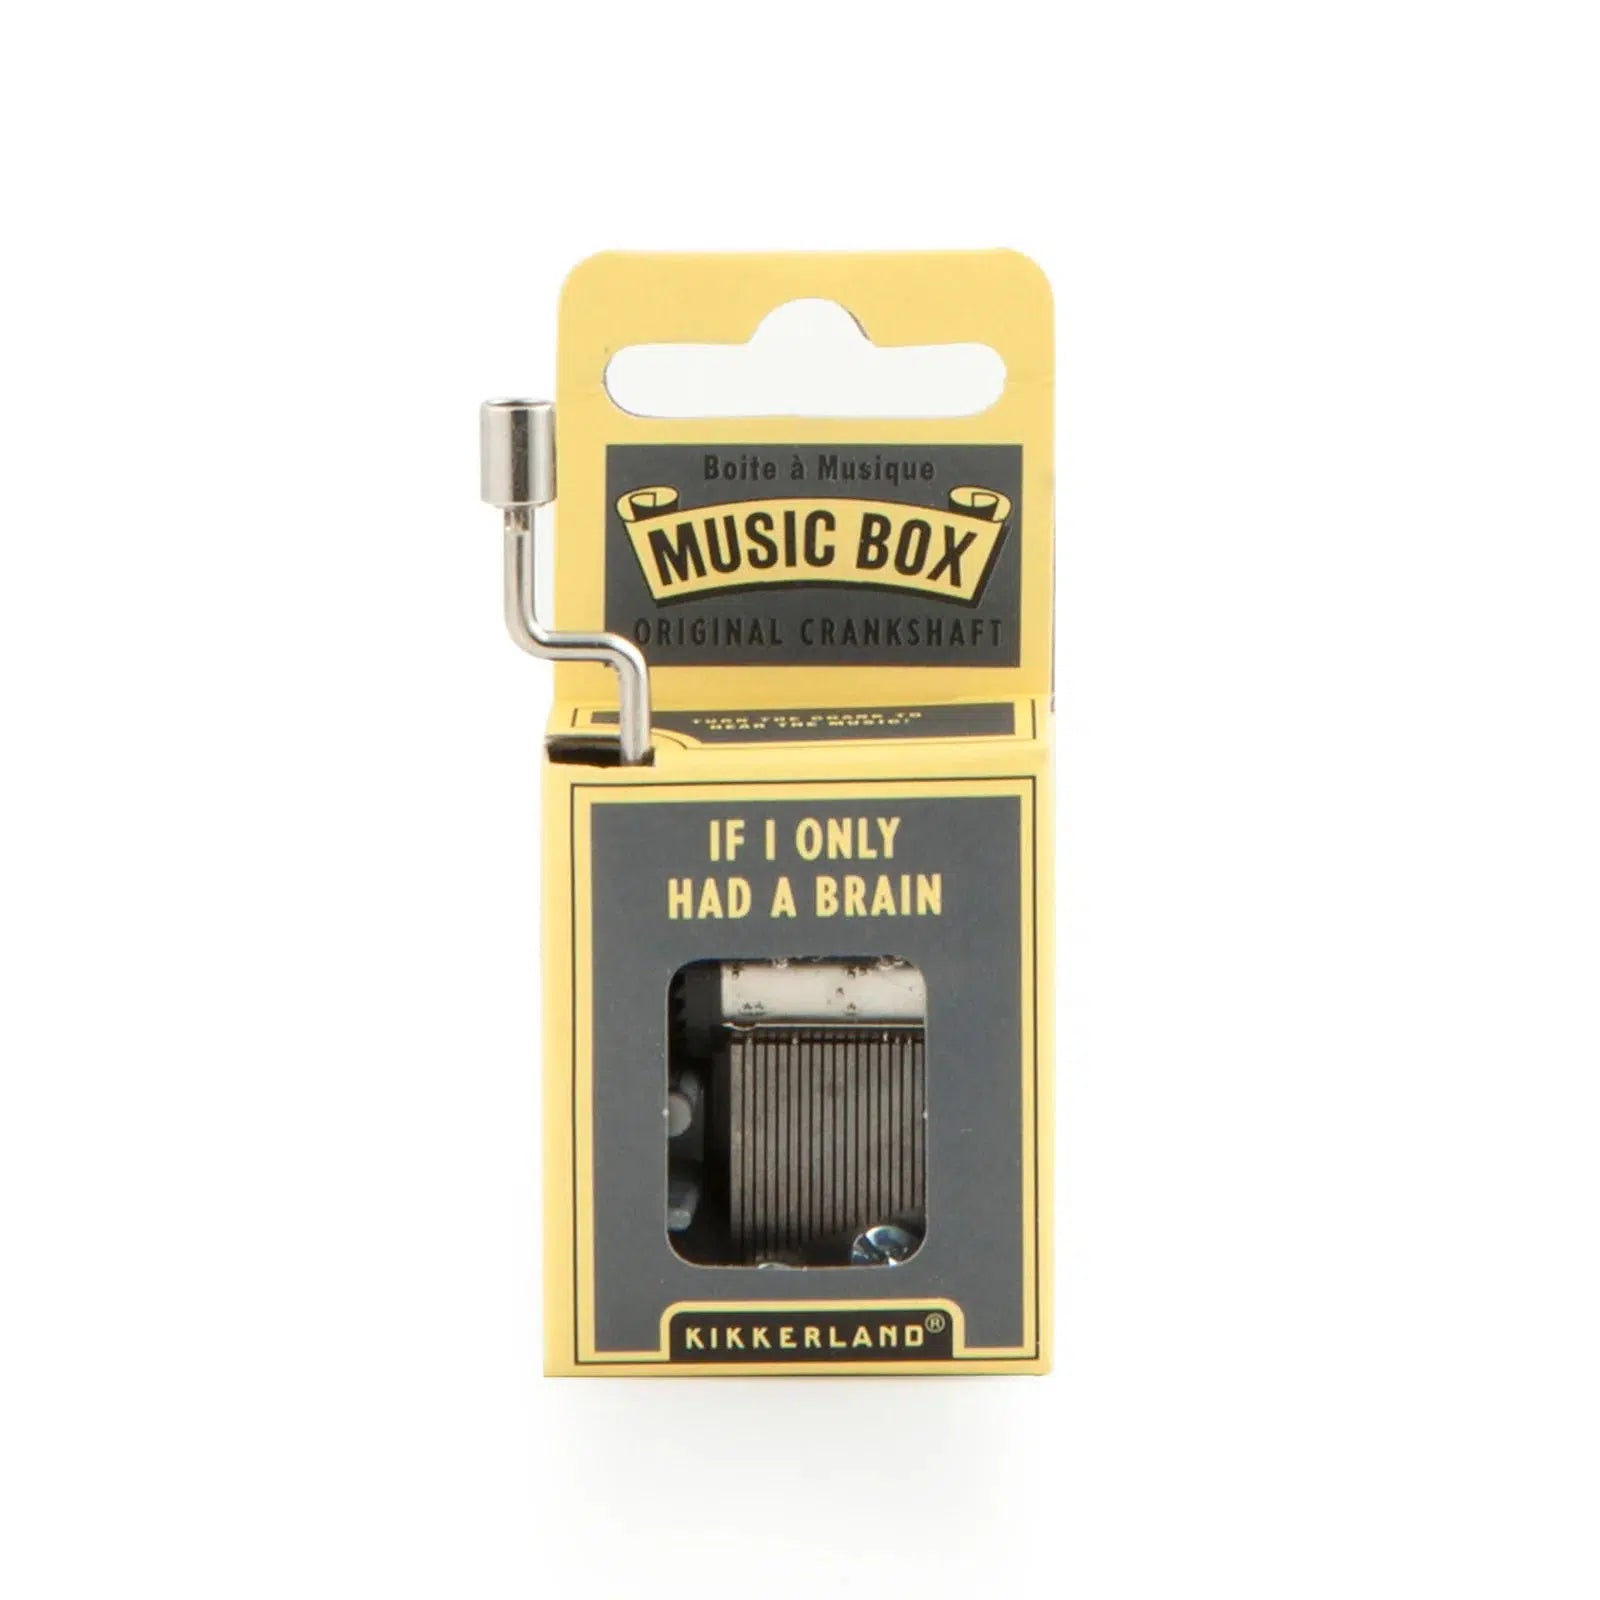 Front view of the "If I Only Had a Brain" music box in the packaging.